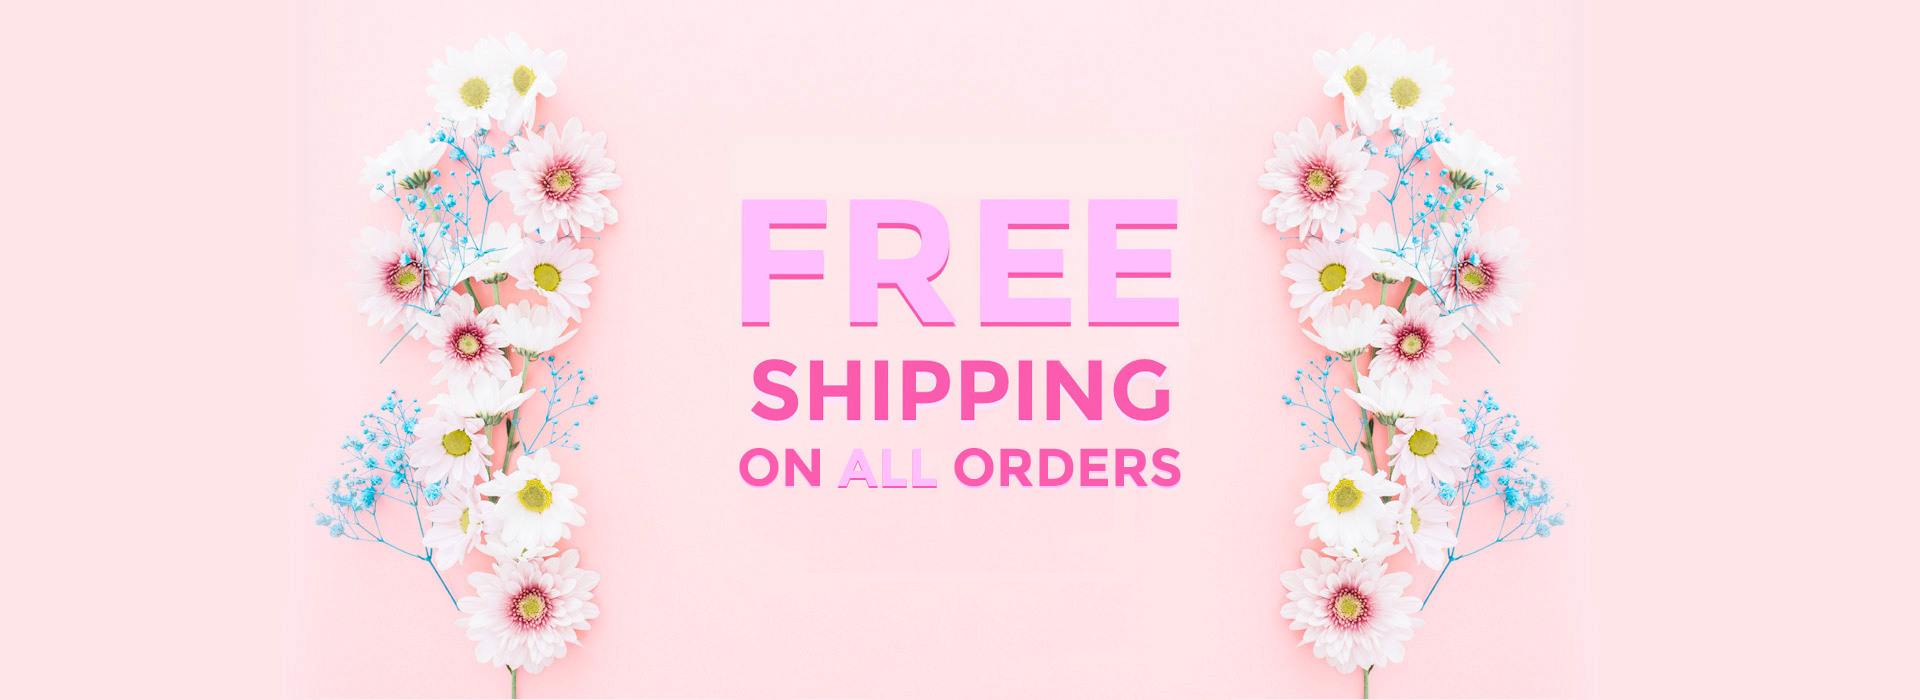 free-shipping-banner-the-lush-lily - The Lush Lily - Brisbane & Gold ...